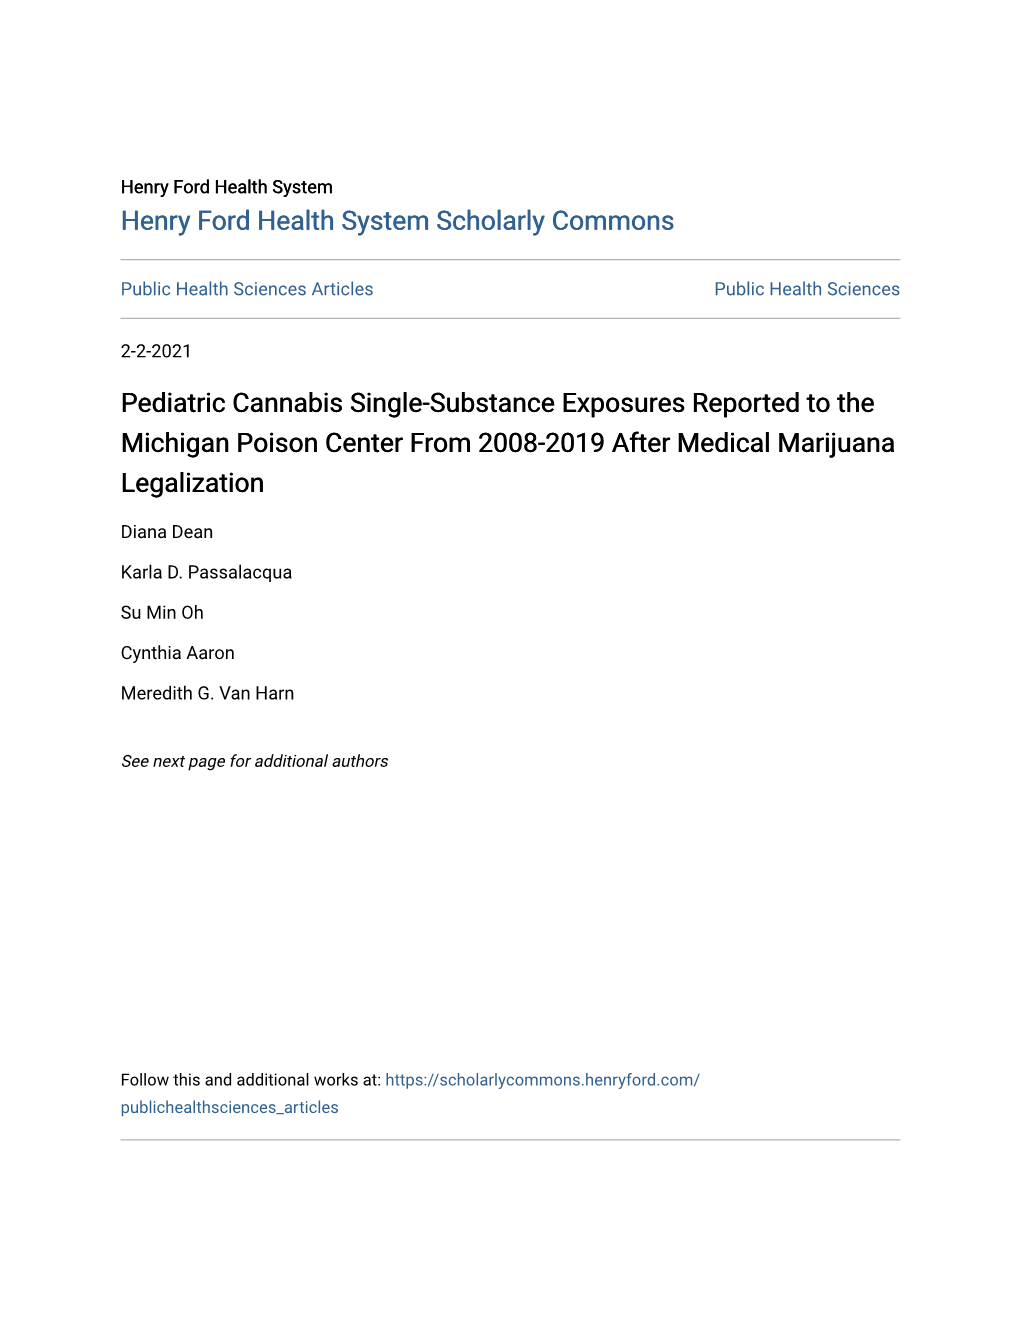 Pediatric Cannabis Single-Substance Exposures Reported to the Michigan Poison Center from 2008-2019 After Medical Marijuana Legalization